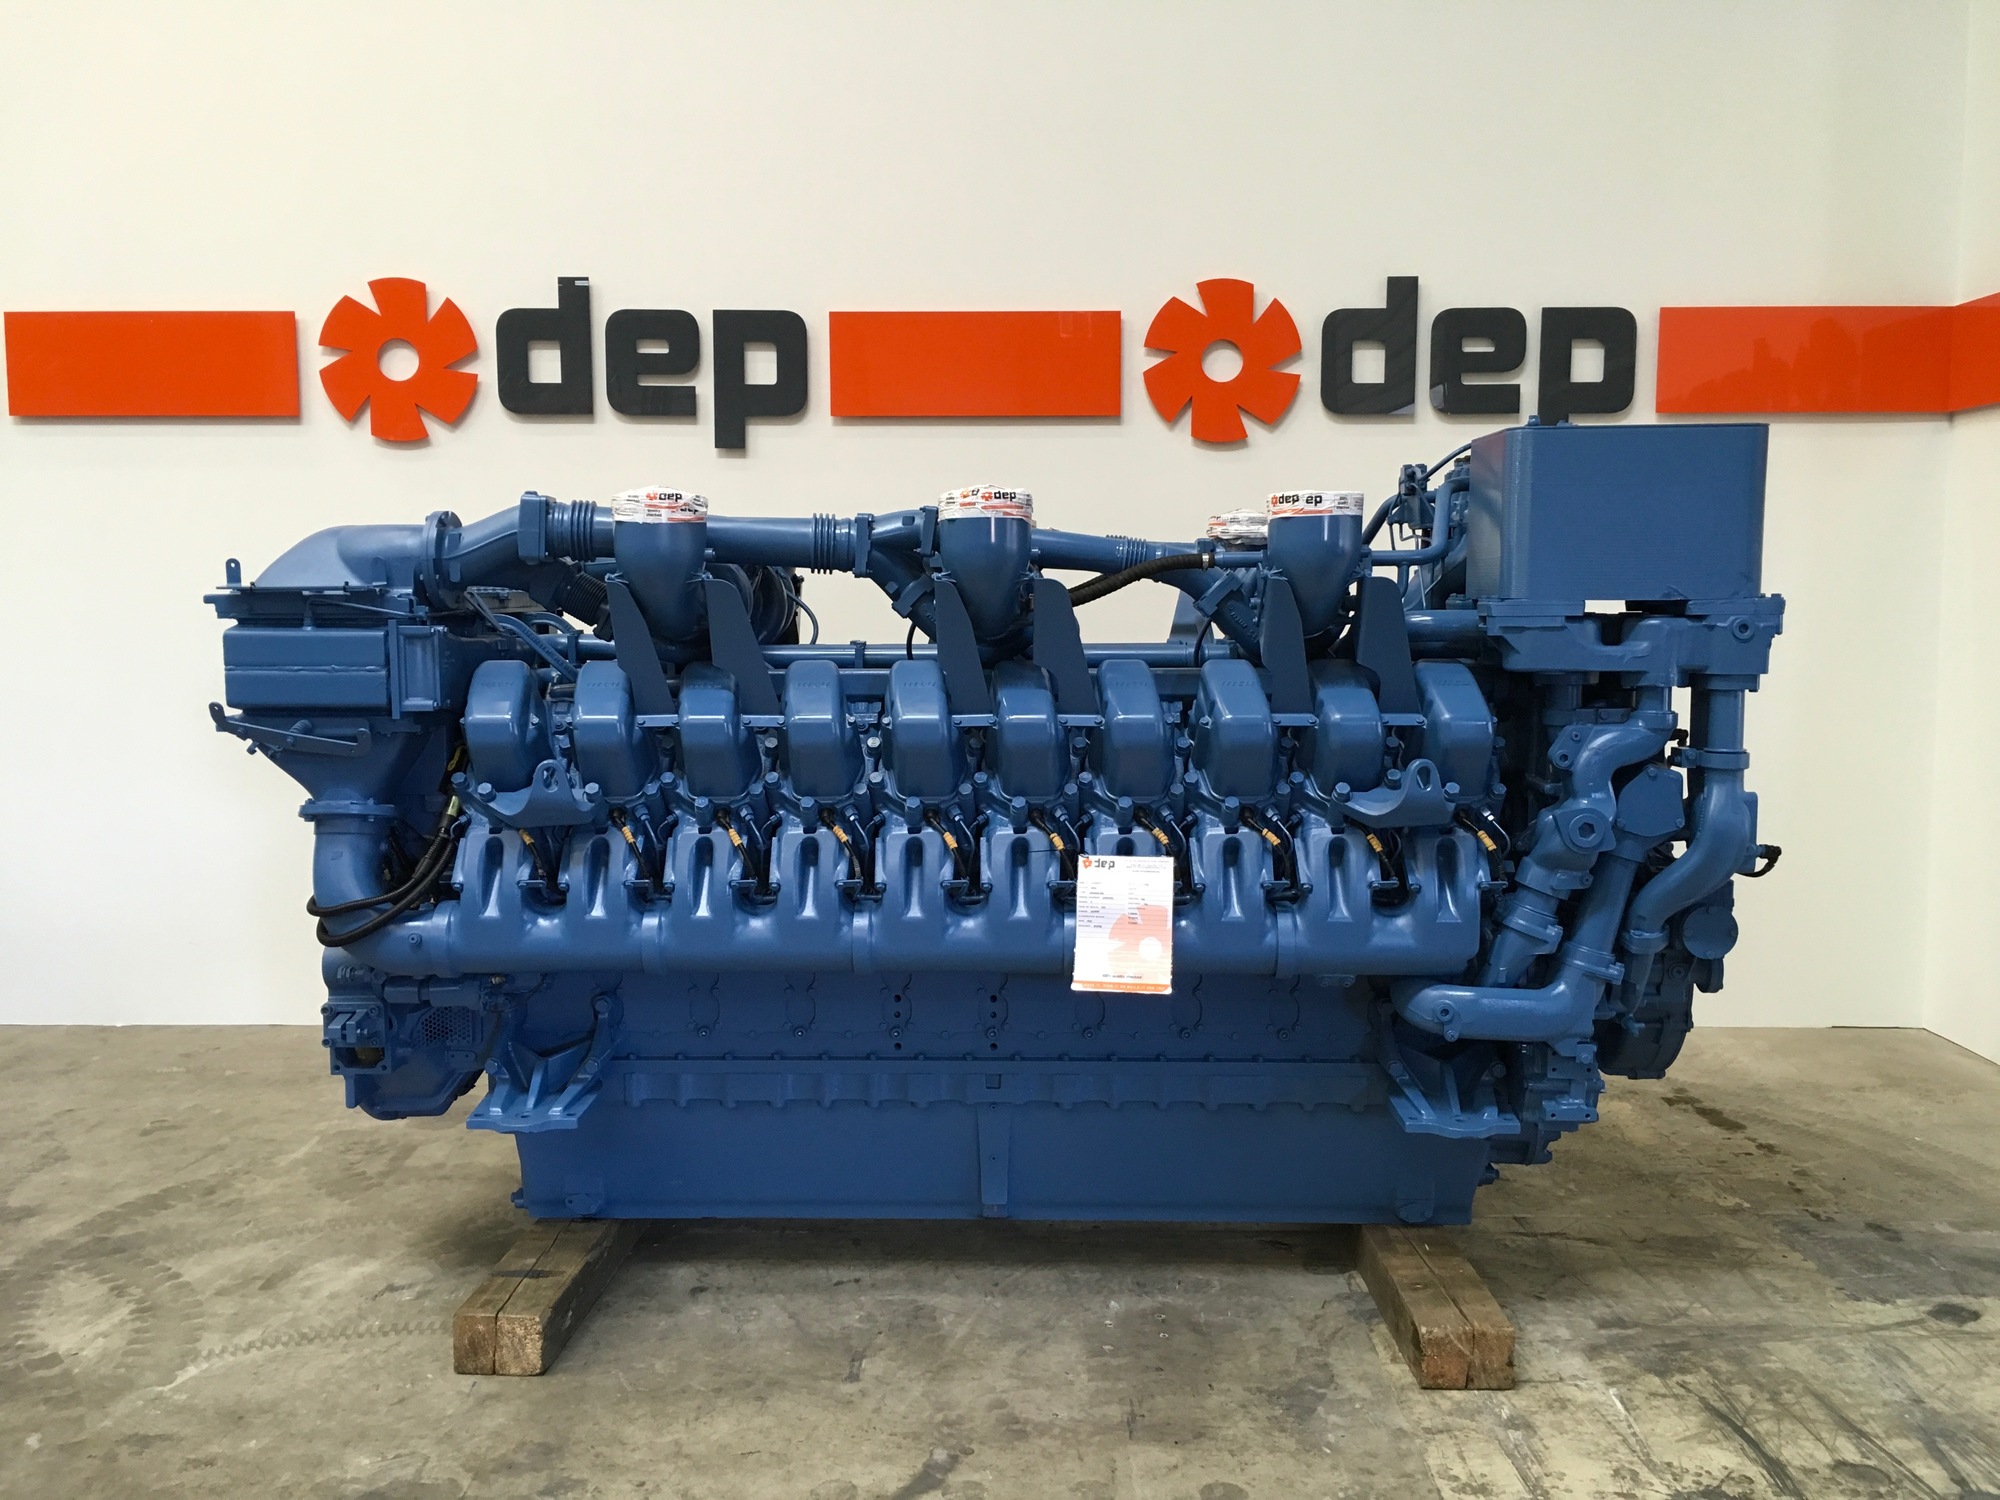 DUTCH ENGINES AND PUMPS undefined: kuva DUTCH ENGINES AND PUMPS undefined